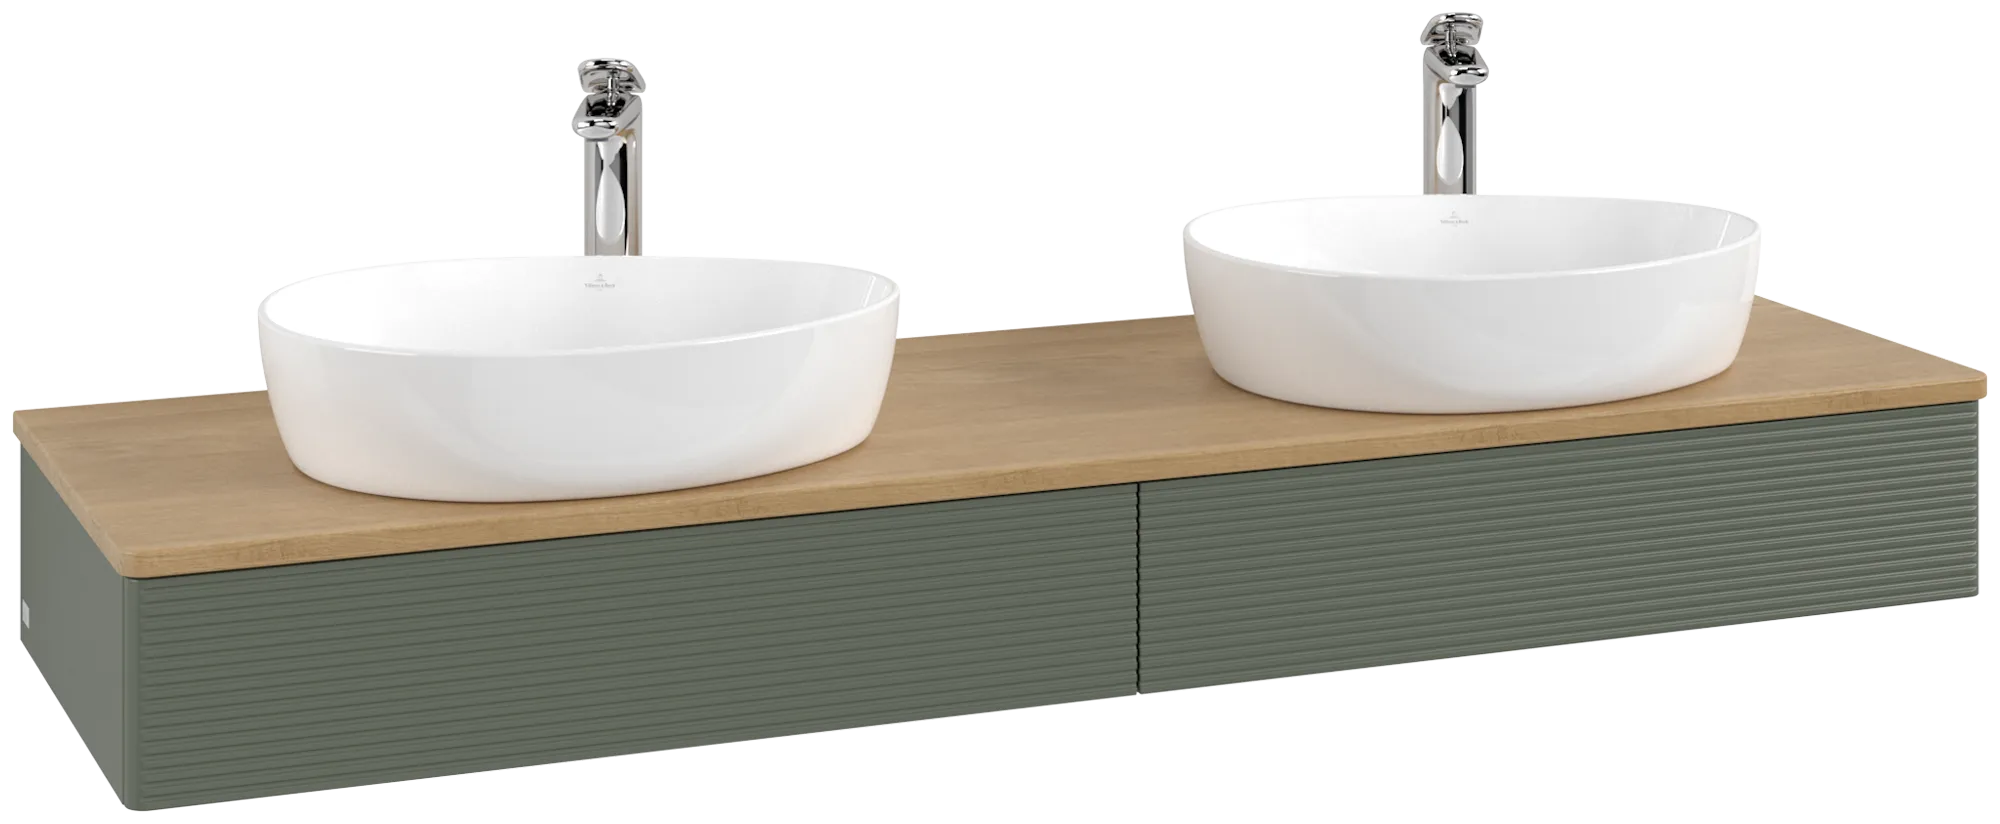 VILLEROY BOCH Antao Vanity unit, 2 pull-out compartments, 1600 x 190 x 500 mm, Front with grain texture, Leaf Green Matt Lacquer / Honey Oak #K17151HL resmi